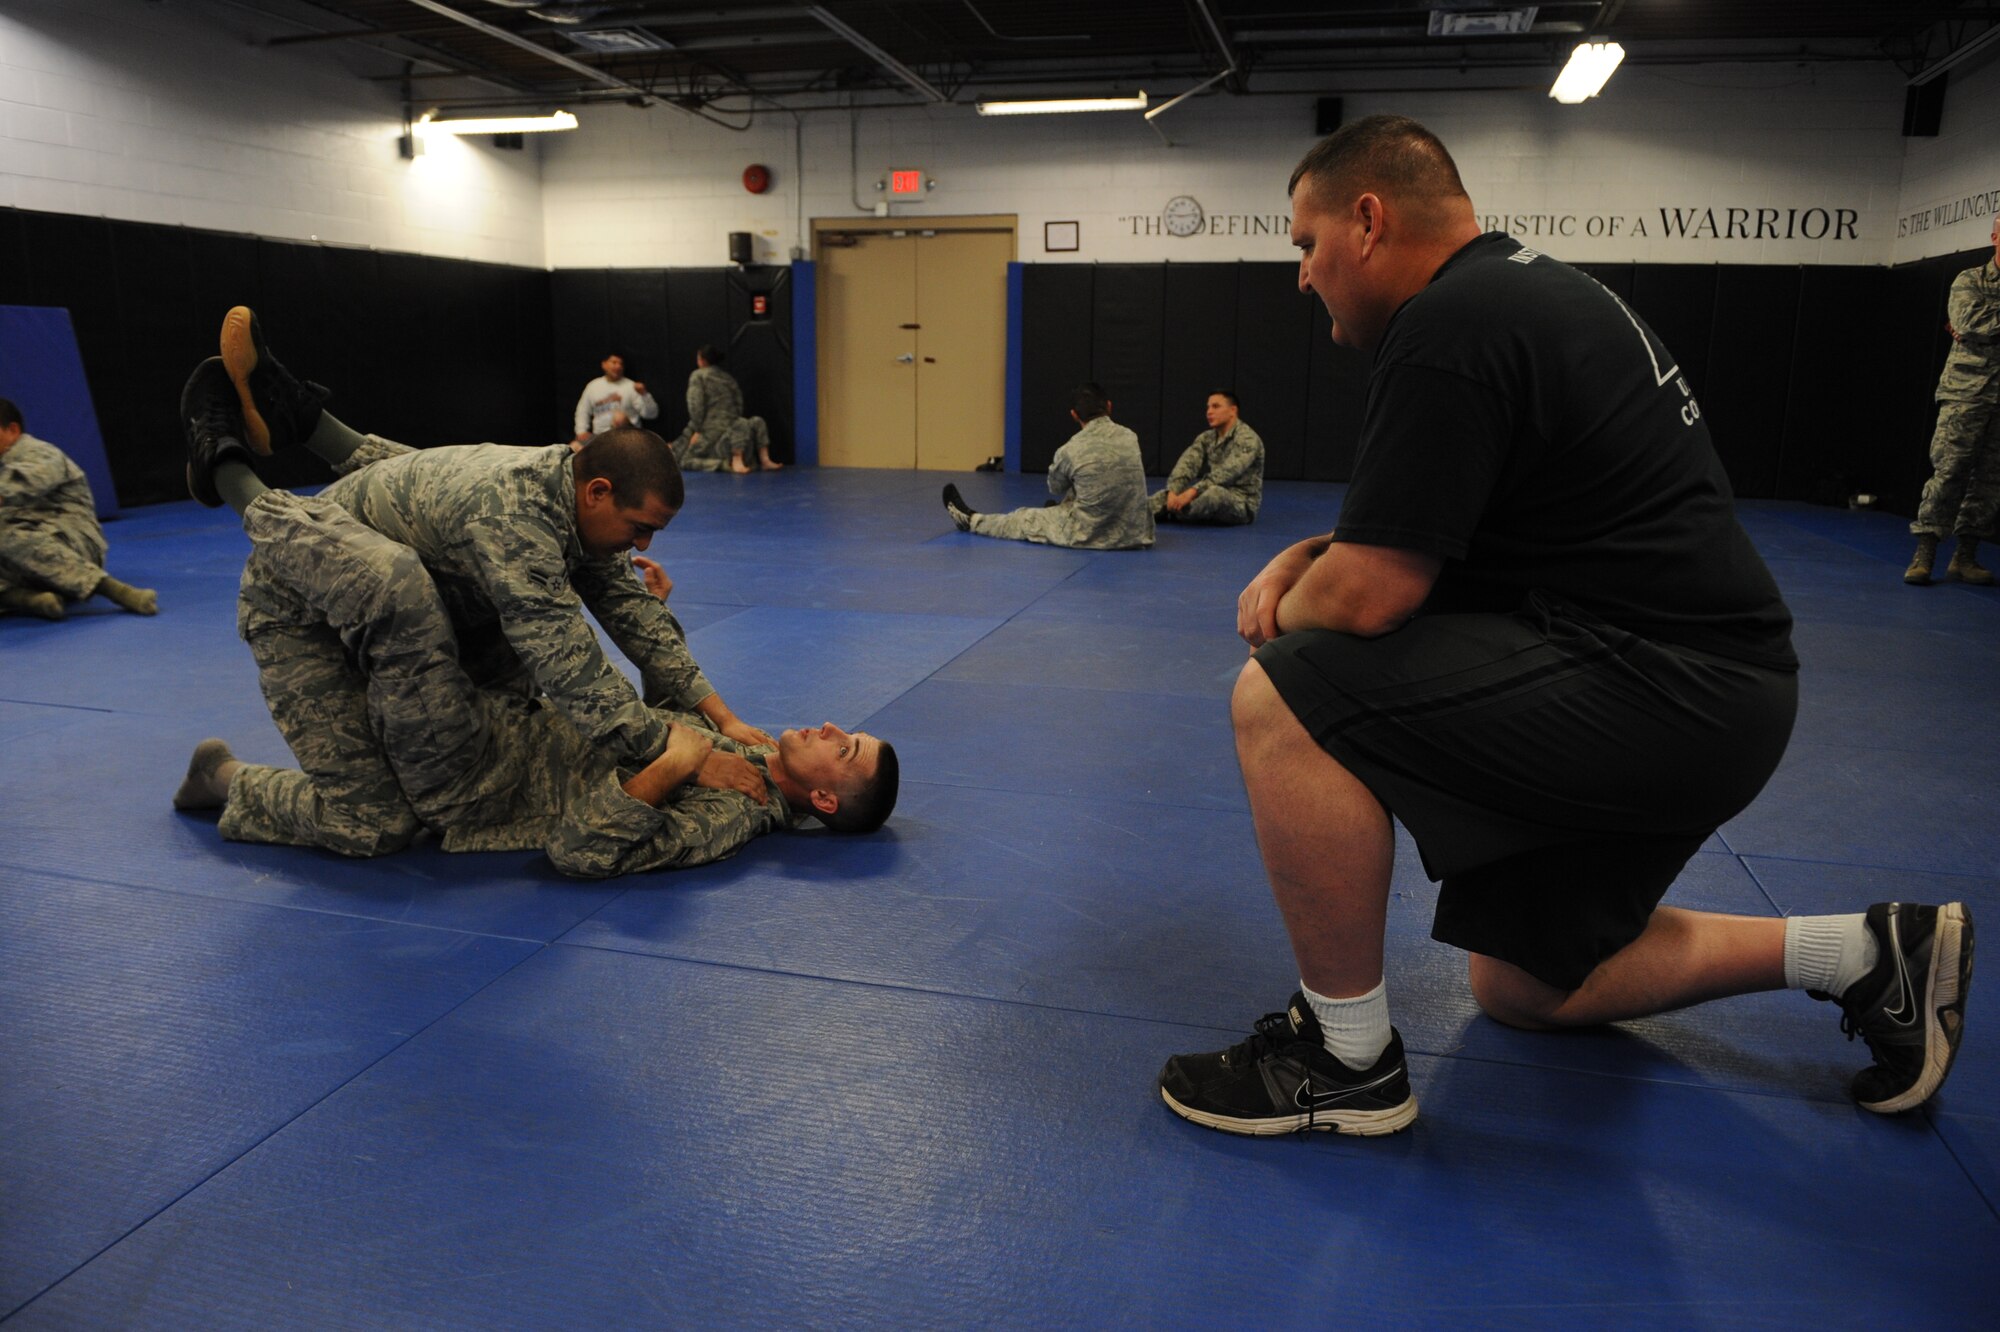 Army instructor Sgt. Major Mark Ruffe observes  Airman 1st Class Stephen Anderson (bottom) forcing Airman 1st Class Jordan Apalategui (top) into a “guard position,” thereby giving Anderson dominancy in the fight. The two security forces specialists were part of an intense 5-day, Army National Guard-instructed training event titled Basic Combative Course at the Western Army National Guard Aviation Training Site gym in Marana, Ariz., March 17-21.